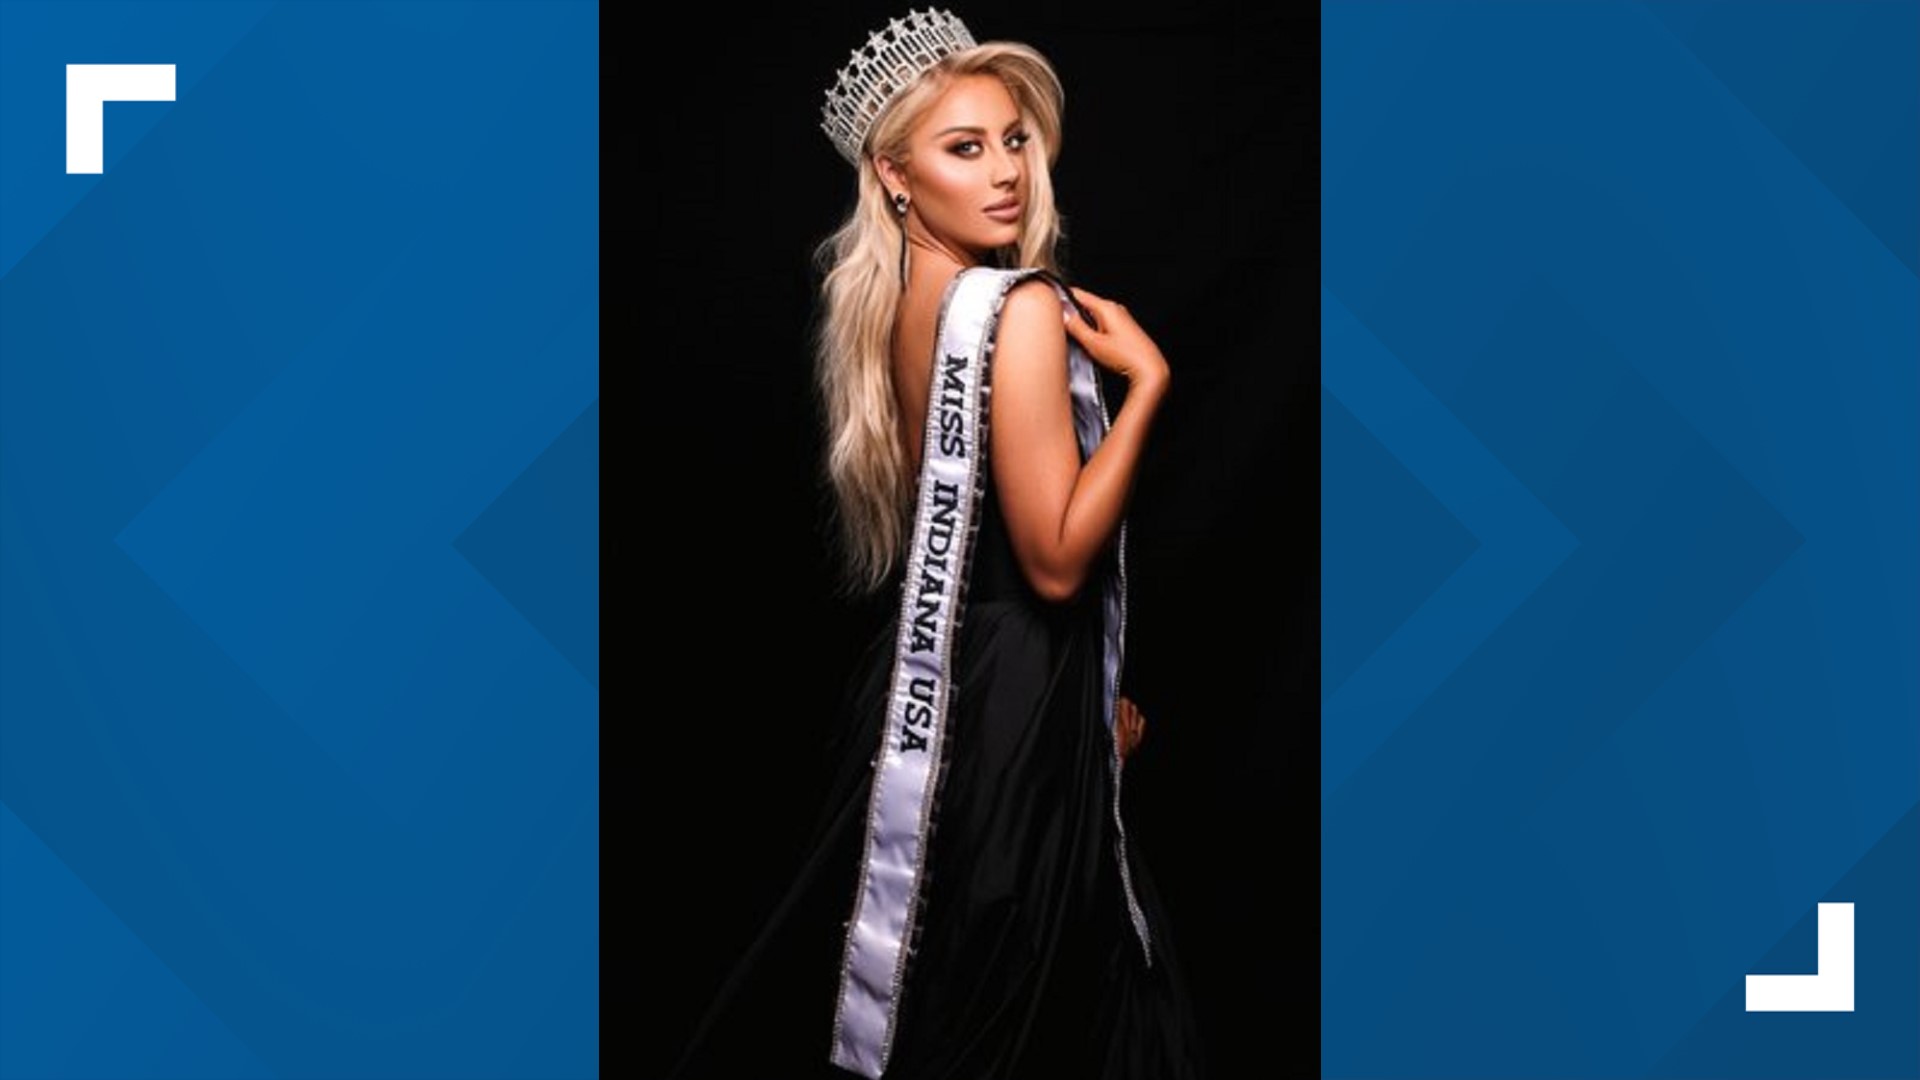 Hoosier native representing Indiana at Miss USA pageant